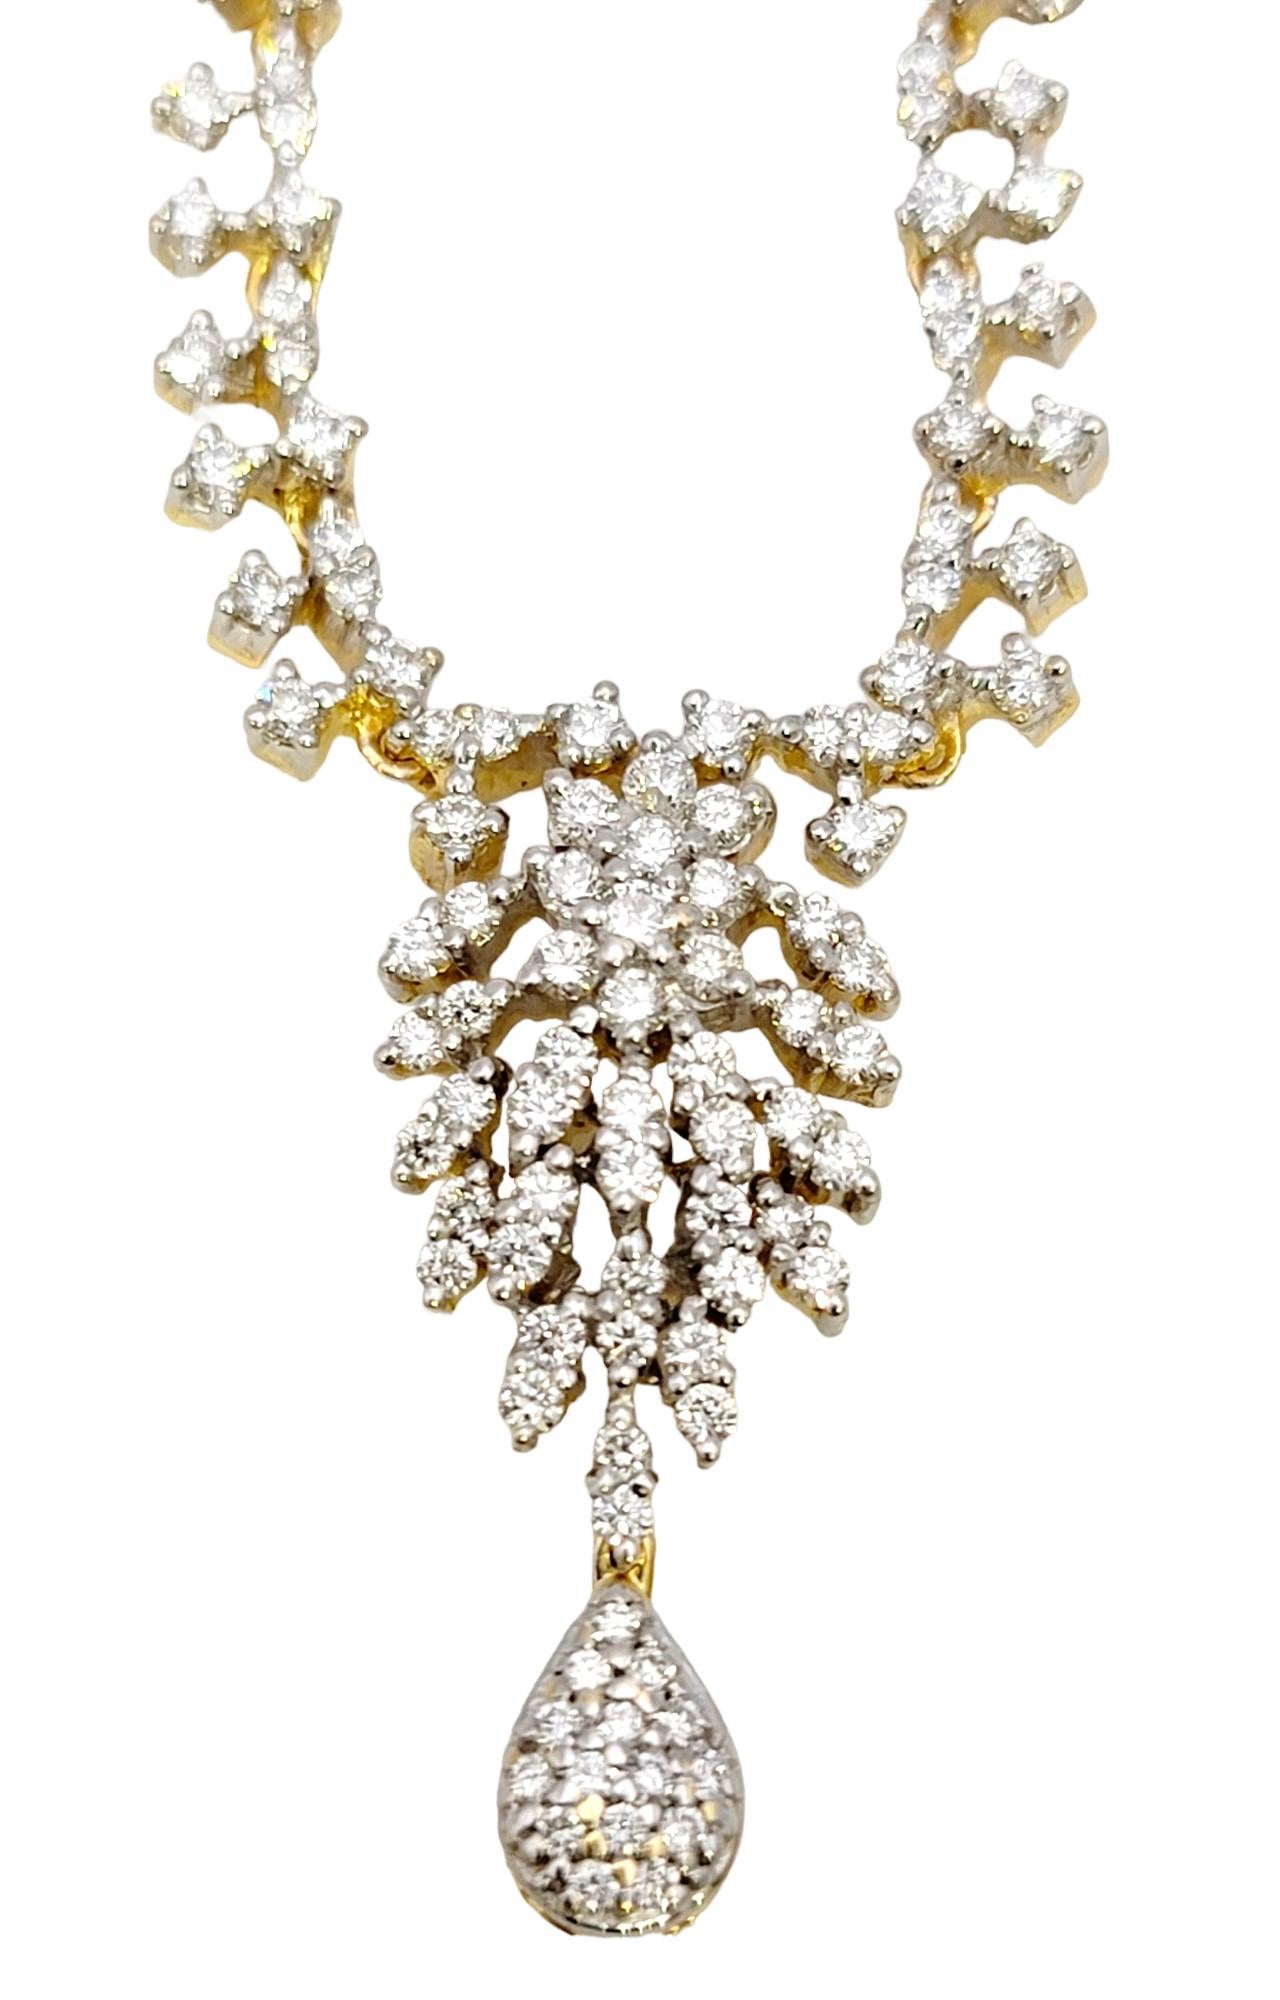 You will absolutely adore this distinctive diamond drop necklace.  Warm yellow gold is paired with sparkling white diamonds in a chic 'Y' design, making this glittering beauty one of your new favorite pieces. 

This lovely necklace features a